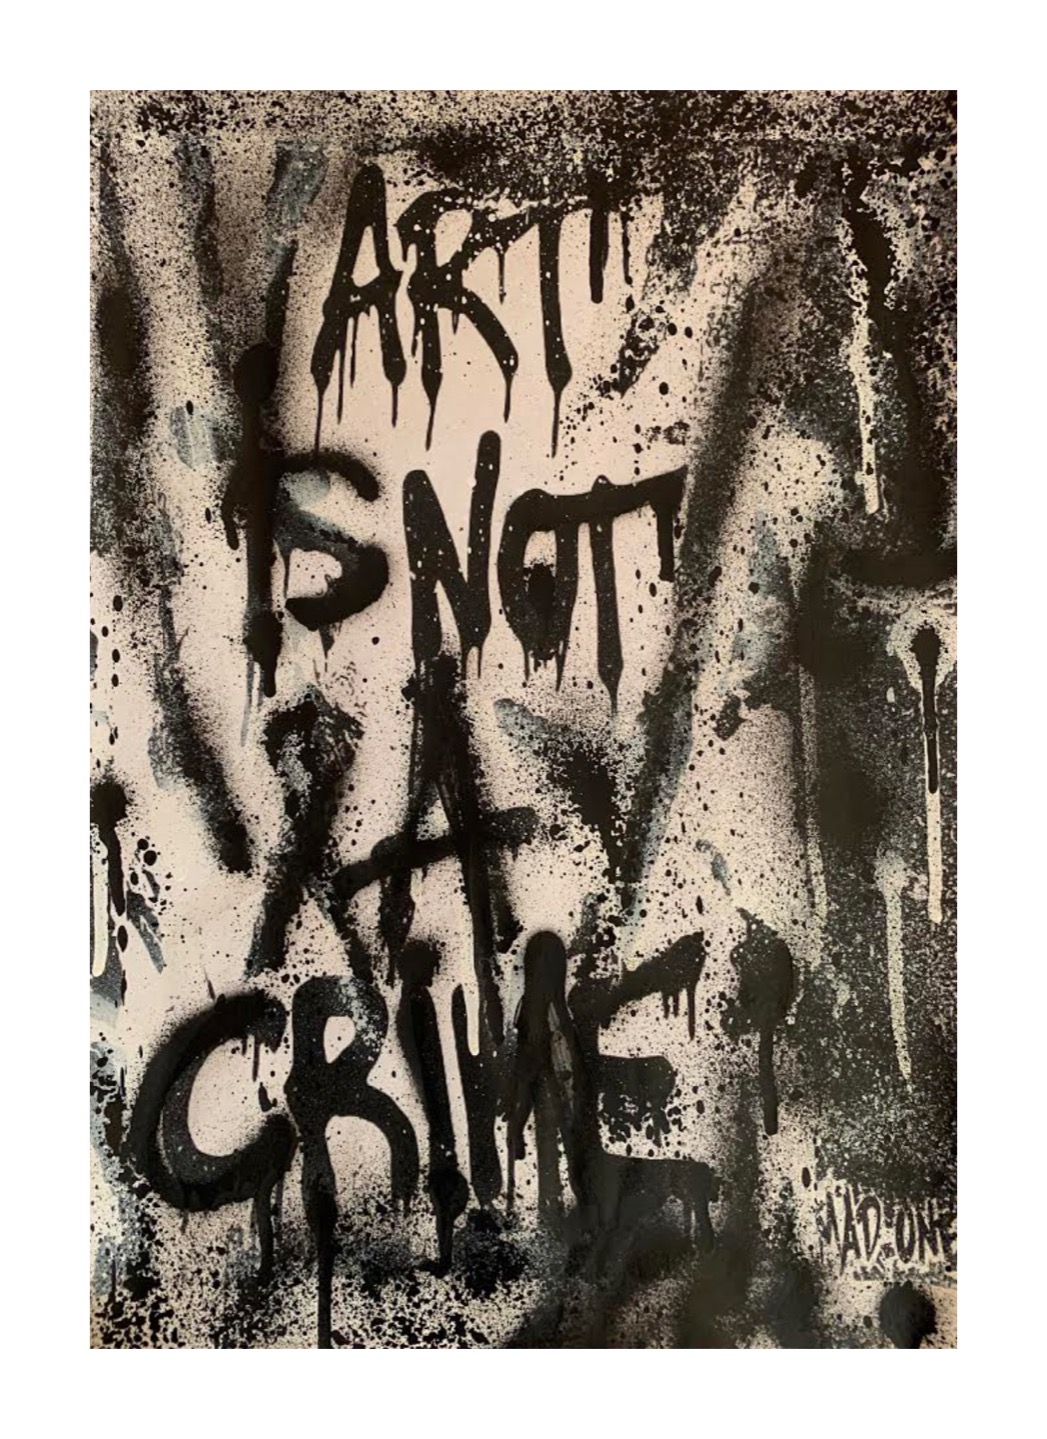 MAD ONE 'ART IS NOT A CRIME' - 2019 - Image 2 of 2